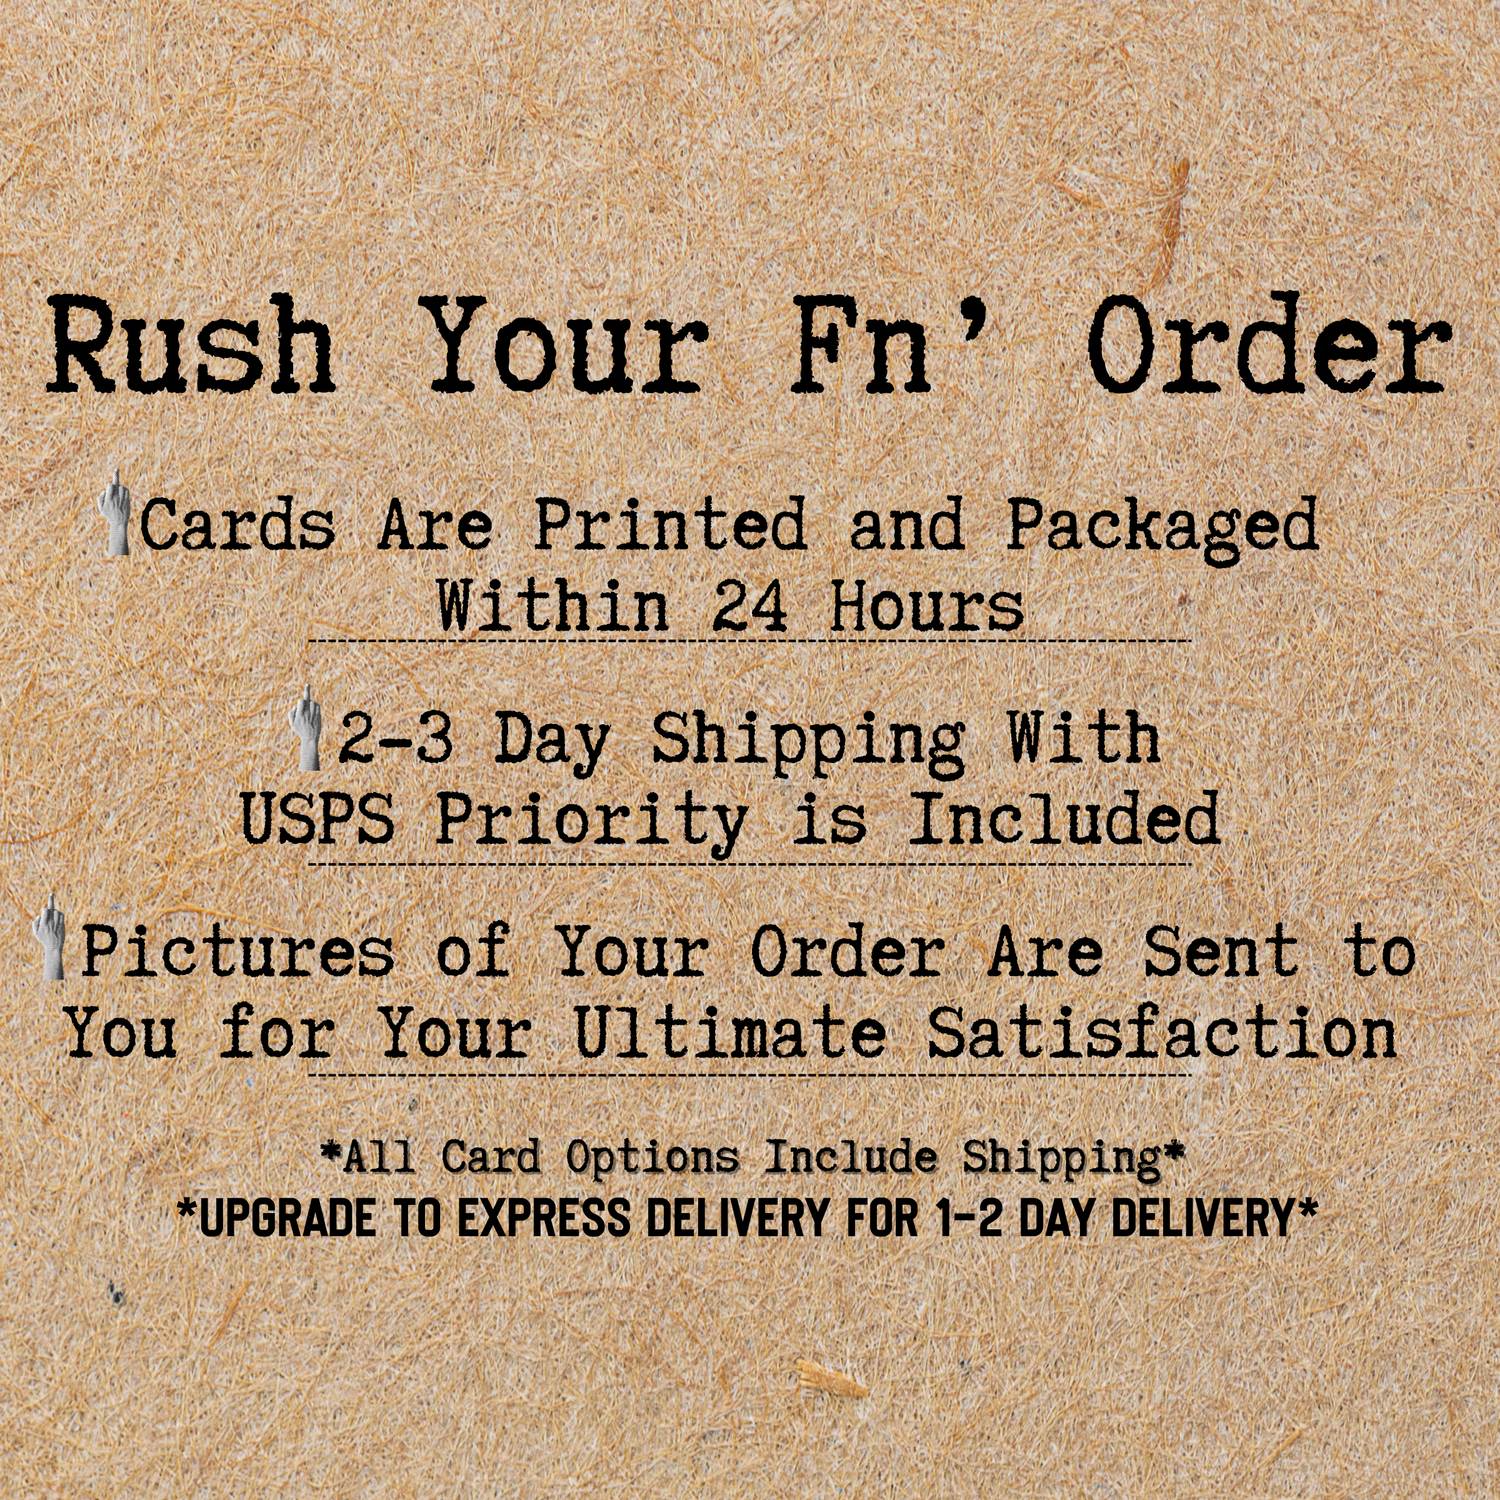 rush your fn order details including 24 hour turn around information